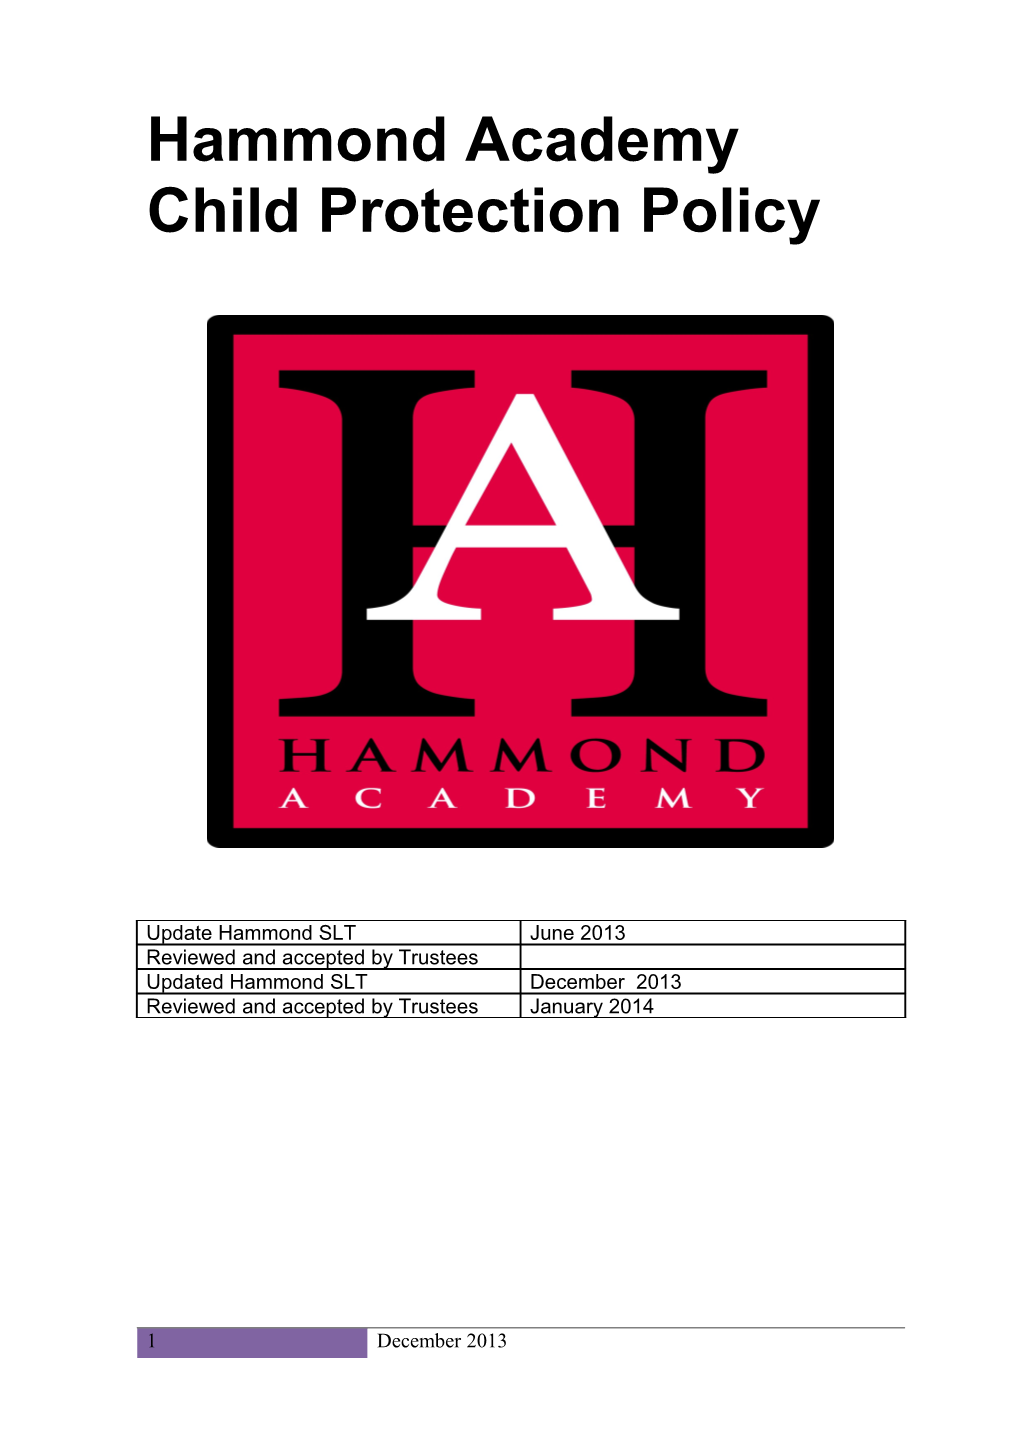 CSF0034 Model Child Protection Policy for Schools